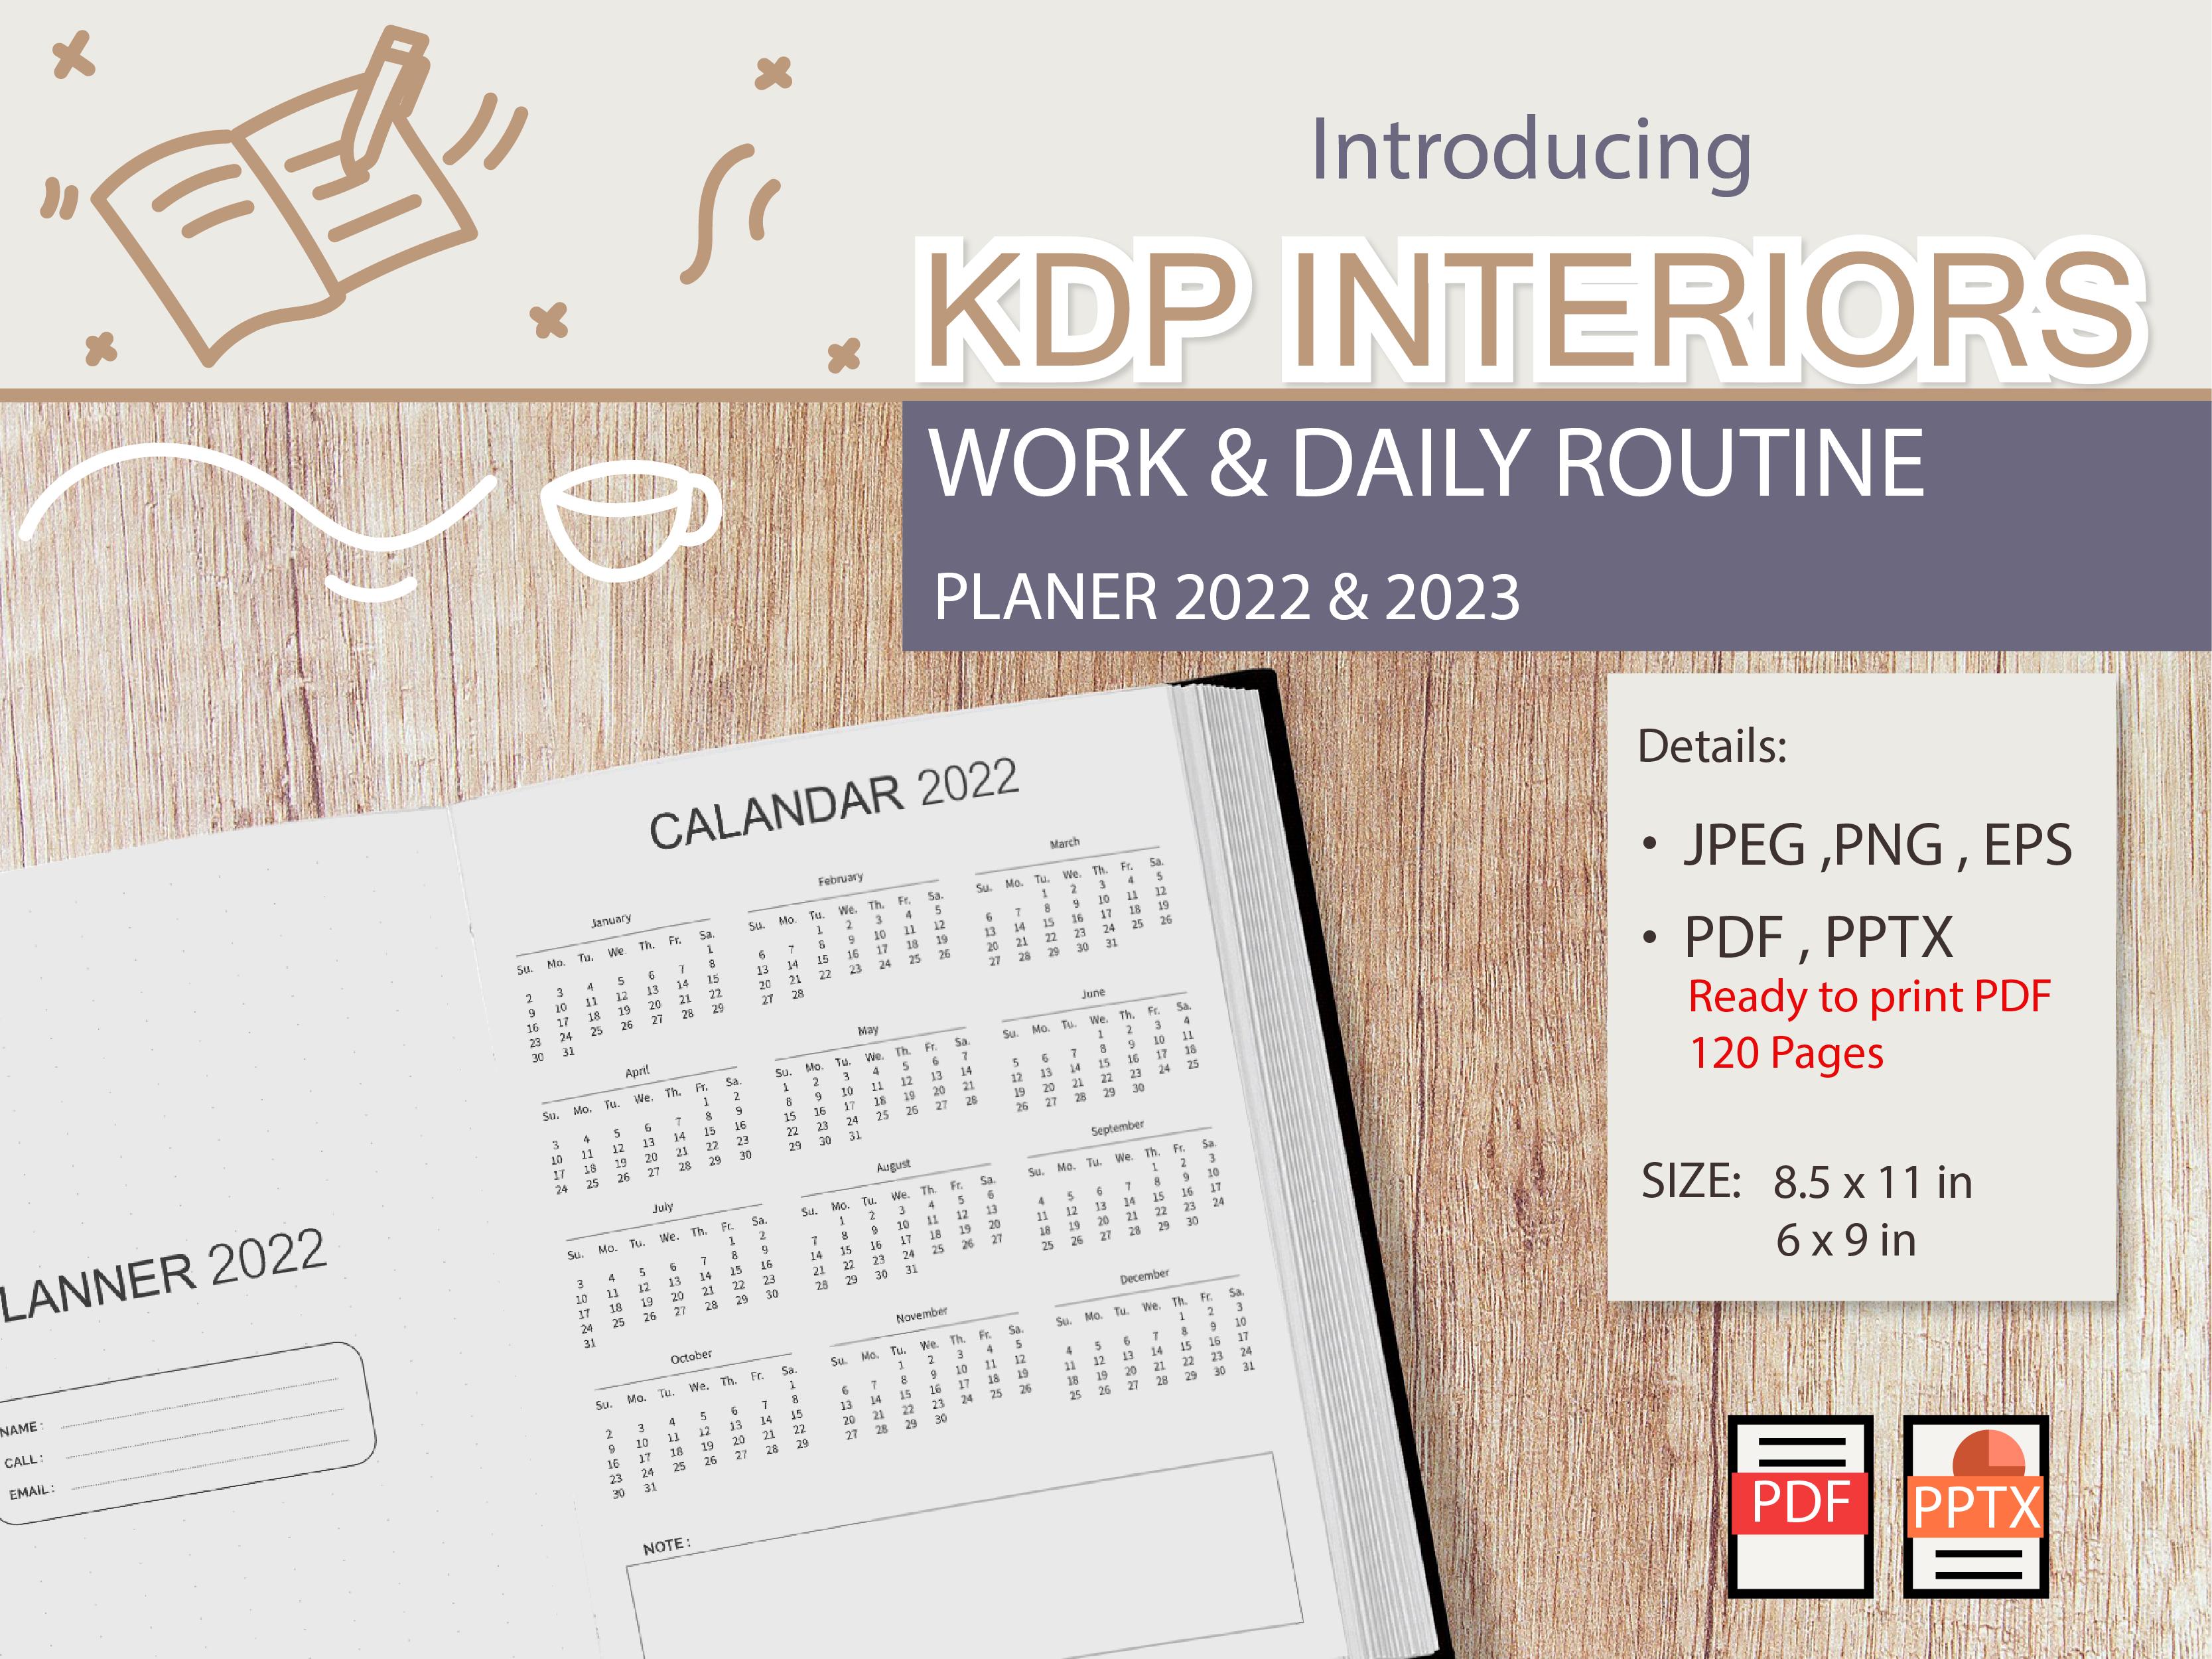 16 KDP Interiors Daily Routine Graphics